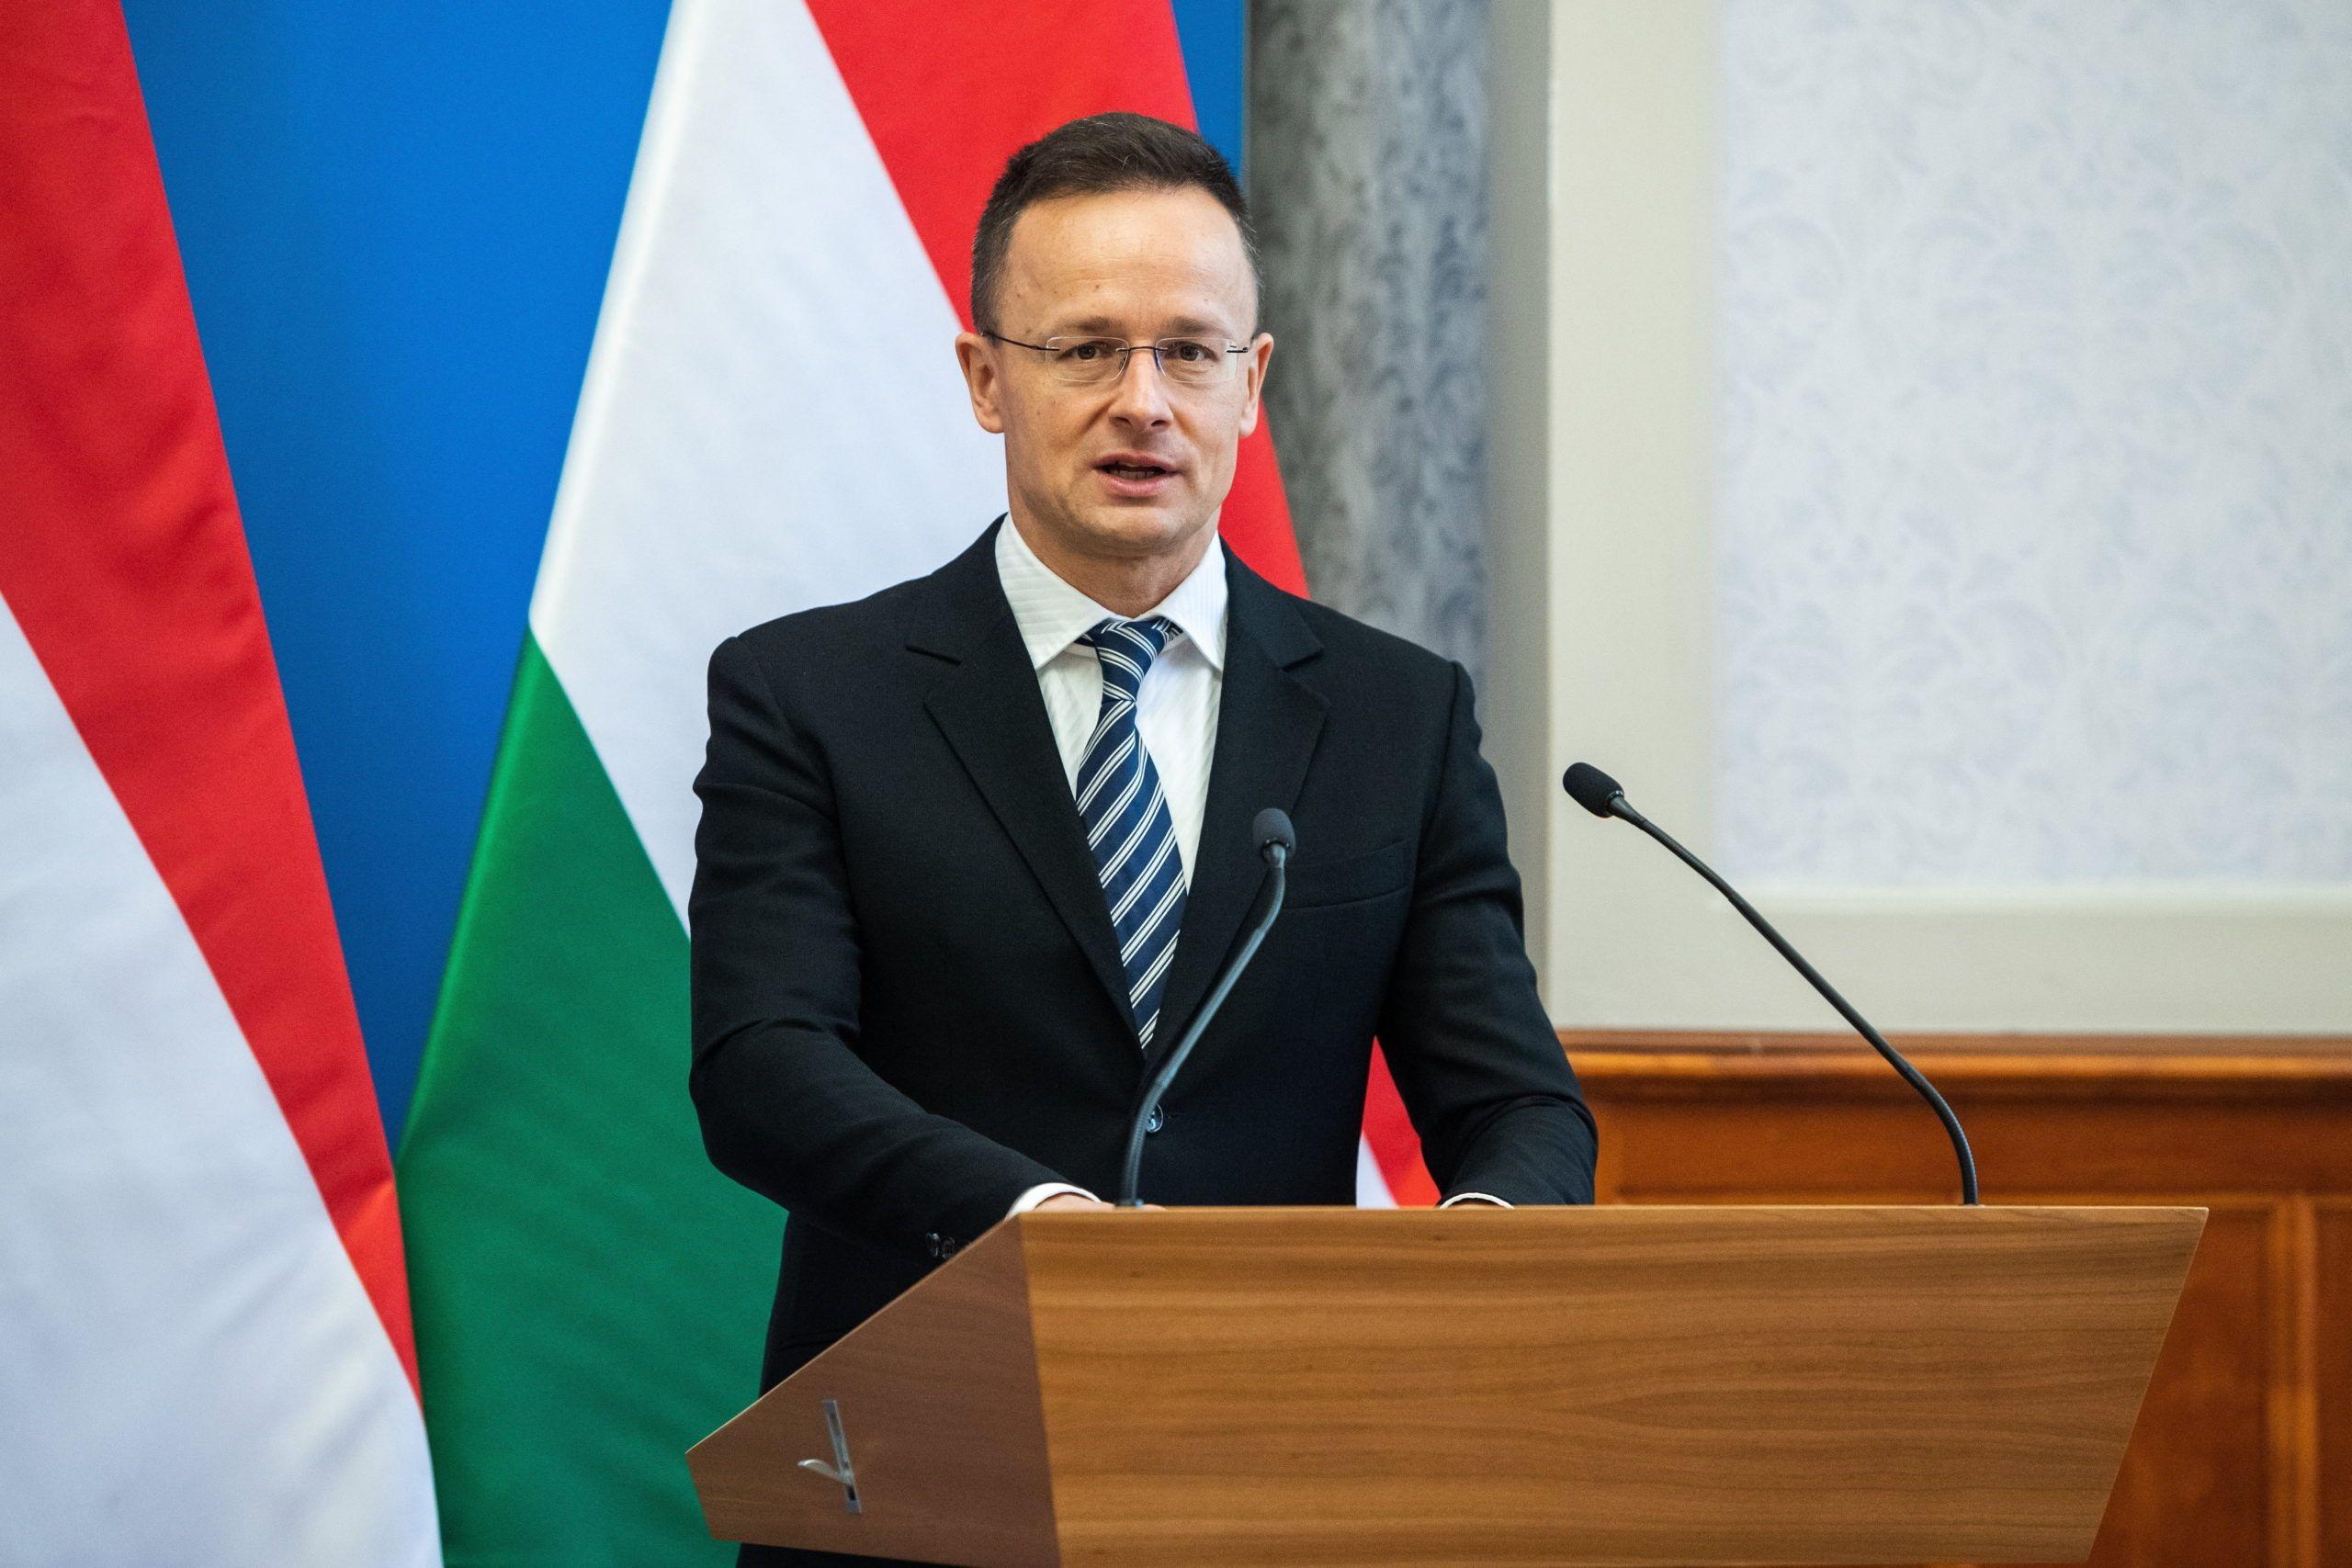 Hungary calls for an early ceasefire in Ukraine